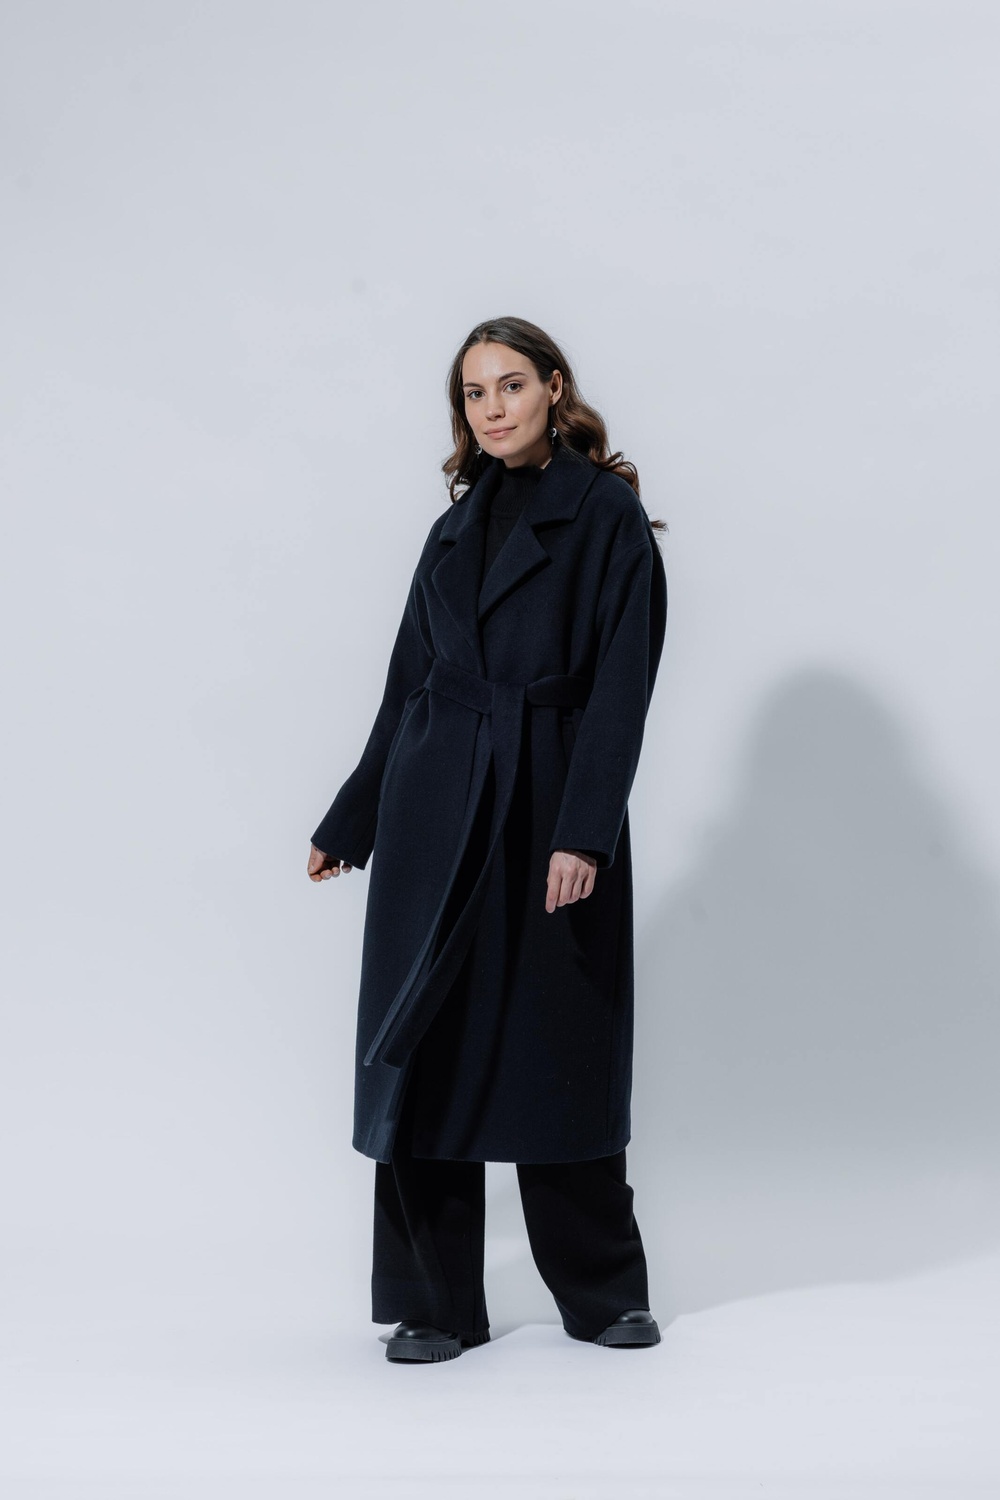 Velvety wool thin coat with a small pile blue-black color